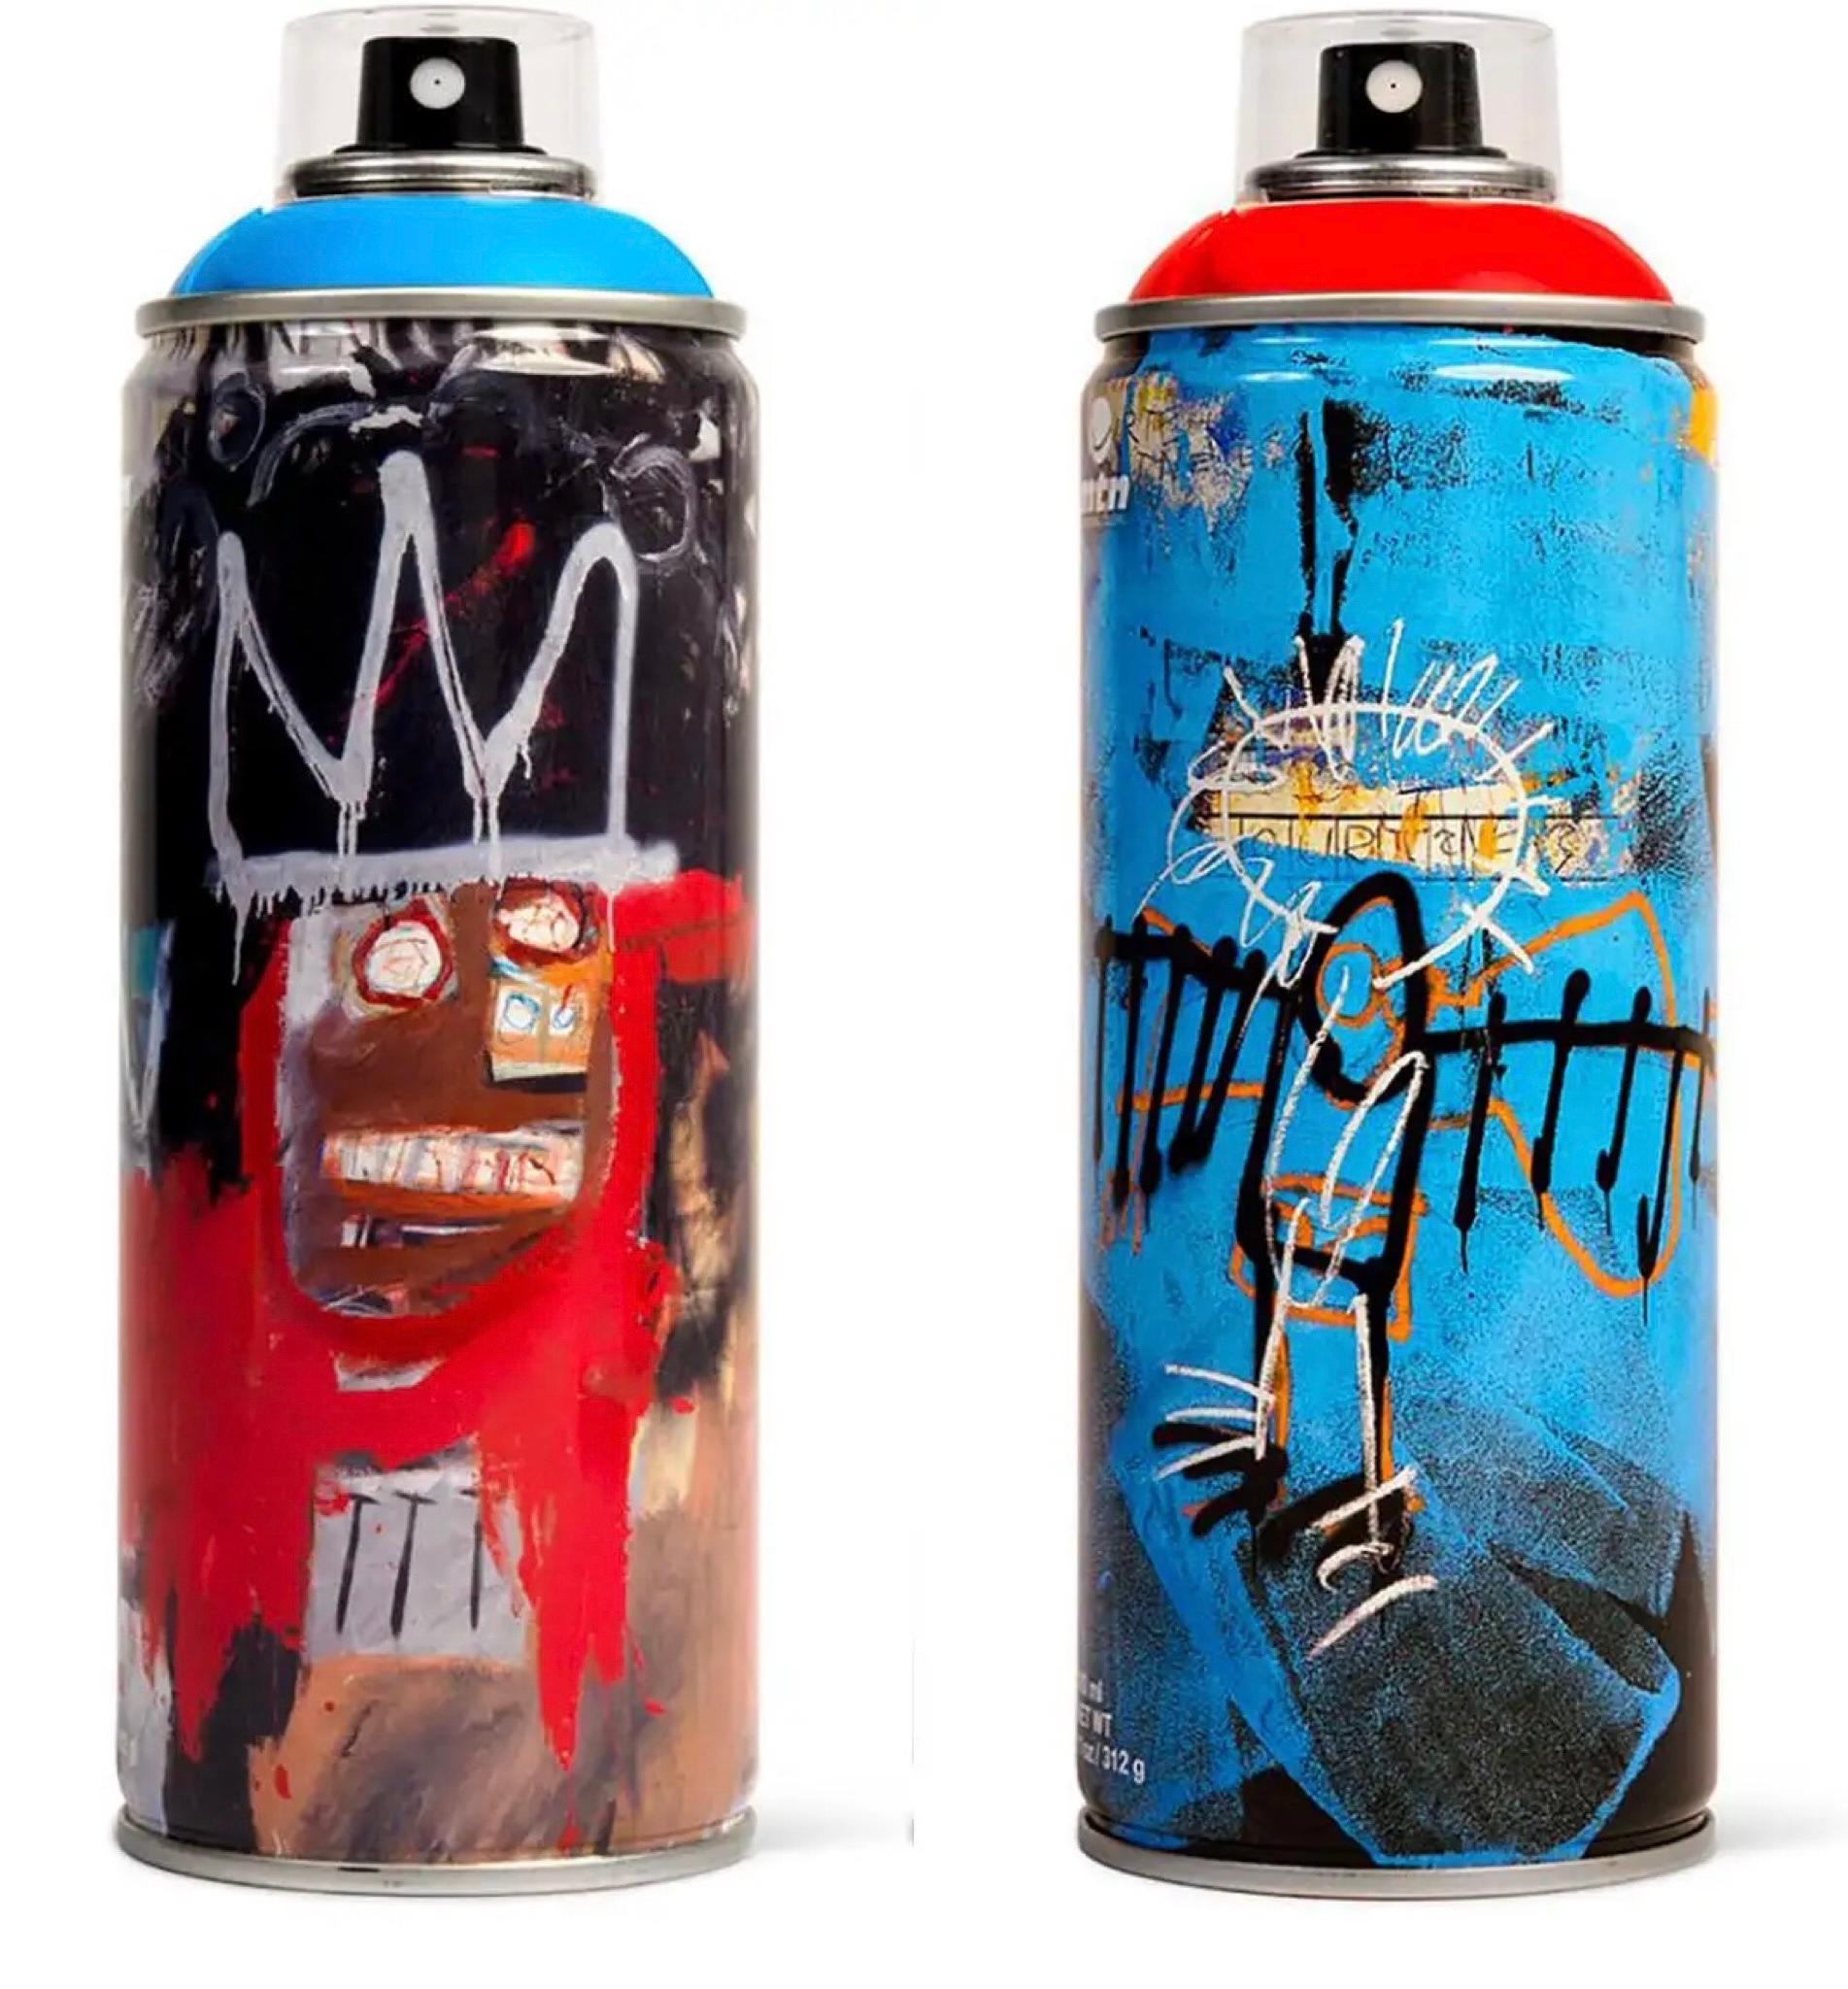 Limited edition Basquiat spray paint can (set of 2) - Print by after Jean-Michel Basquiat